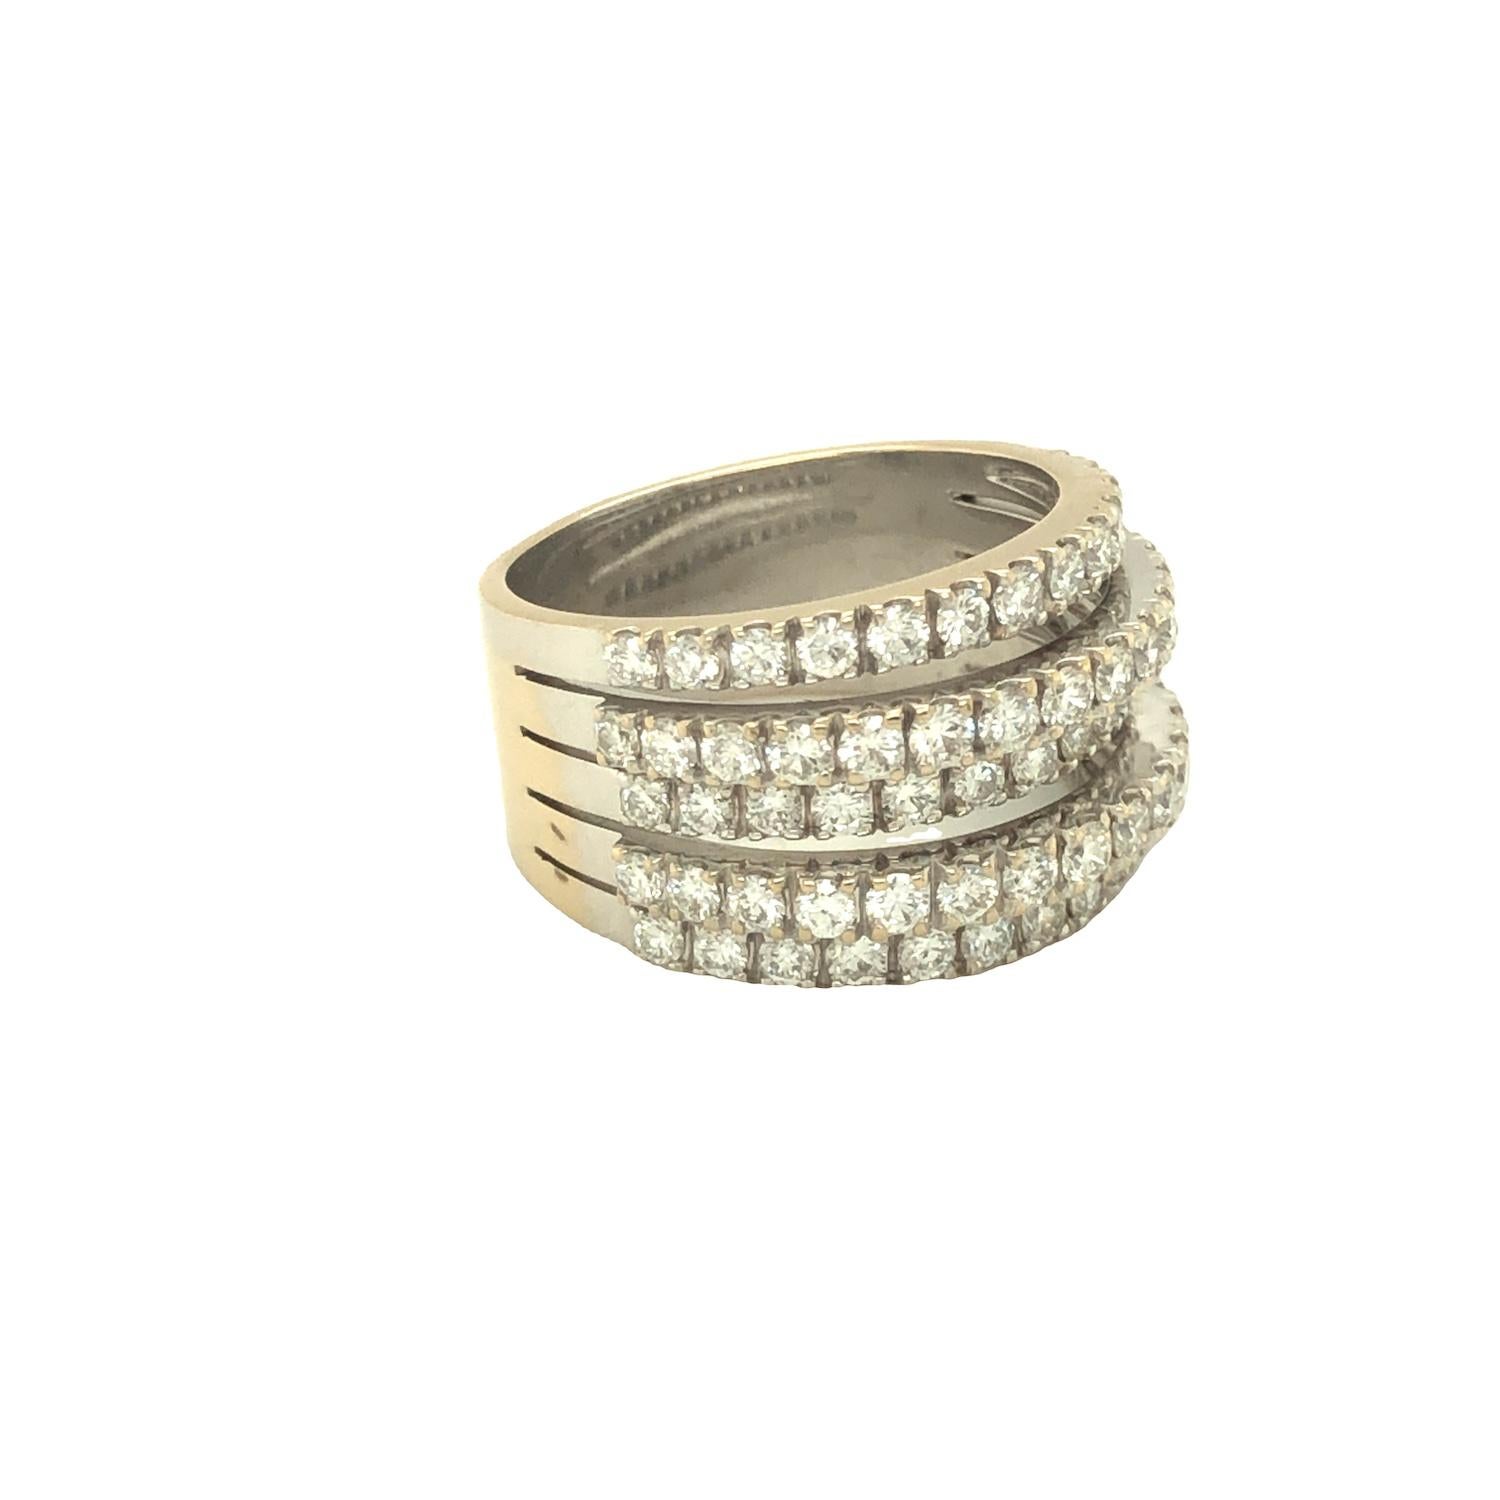 De Beers 1.75 Carat Five Line Diamond Band Ring 18K White Gold In Excellent Condition For Sale In beverly hills, CA